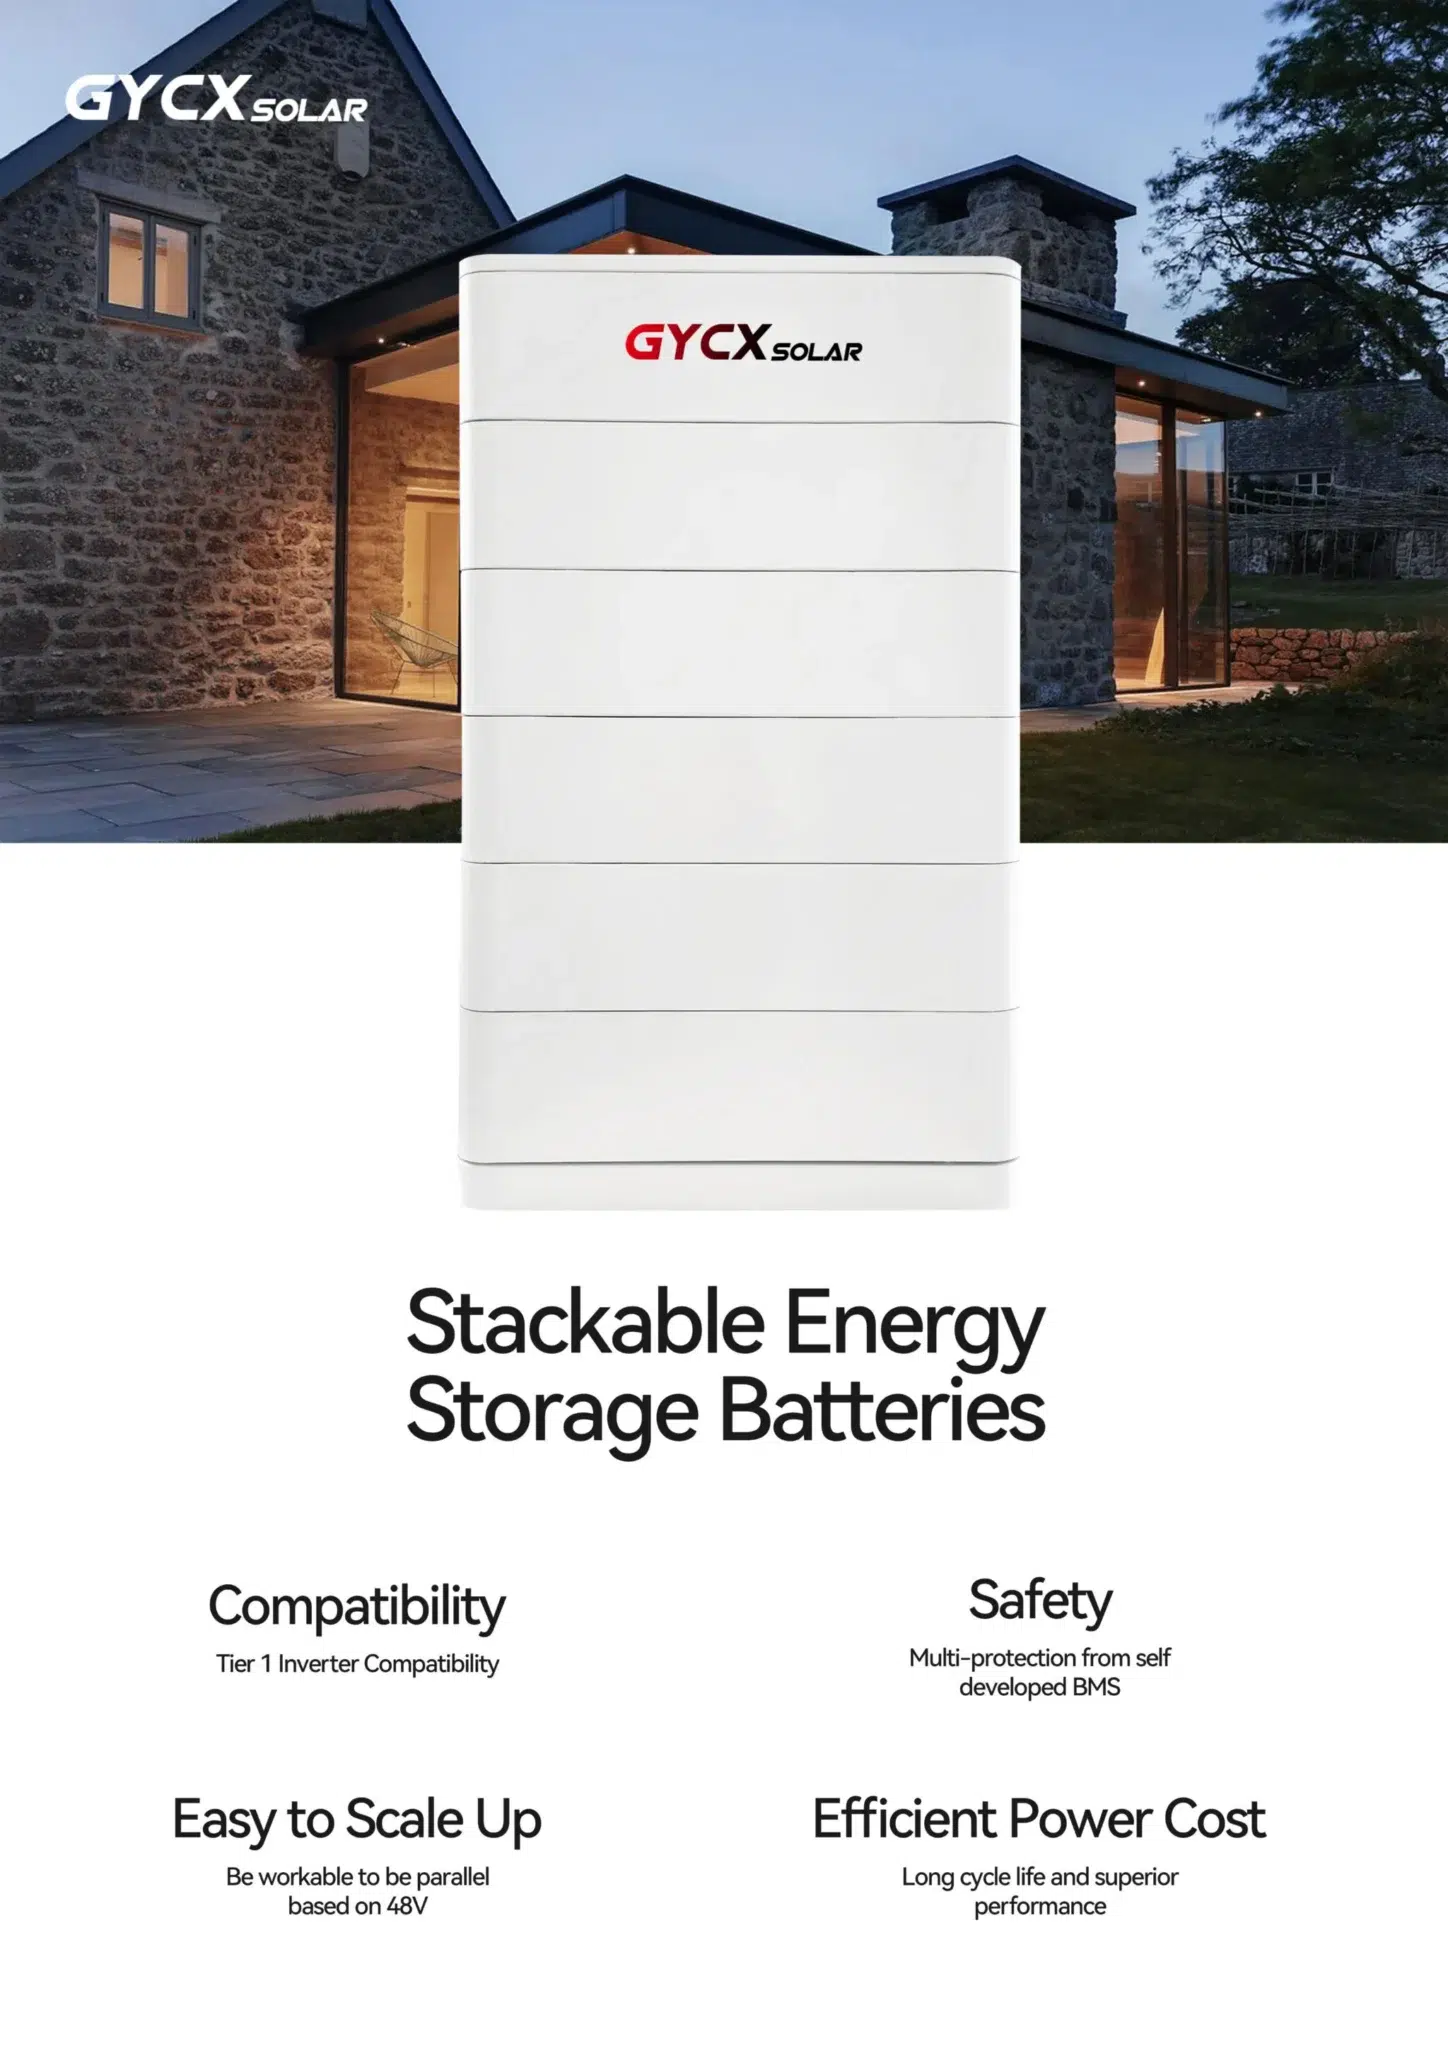 5kw lithium battery stackable